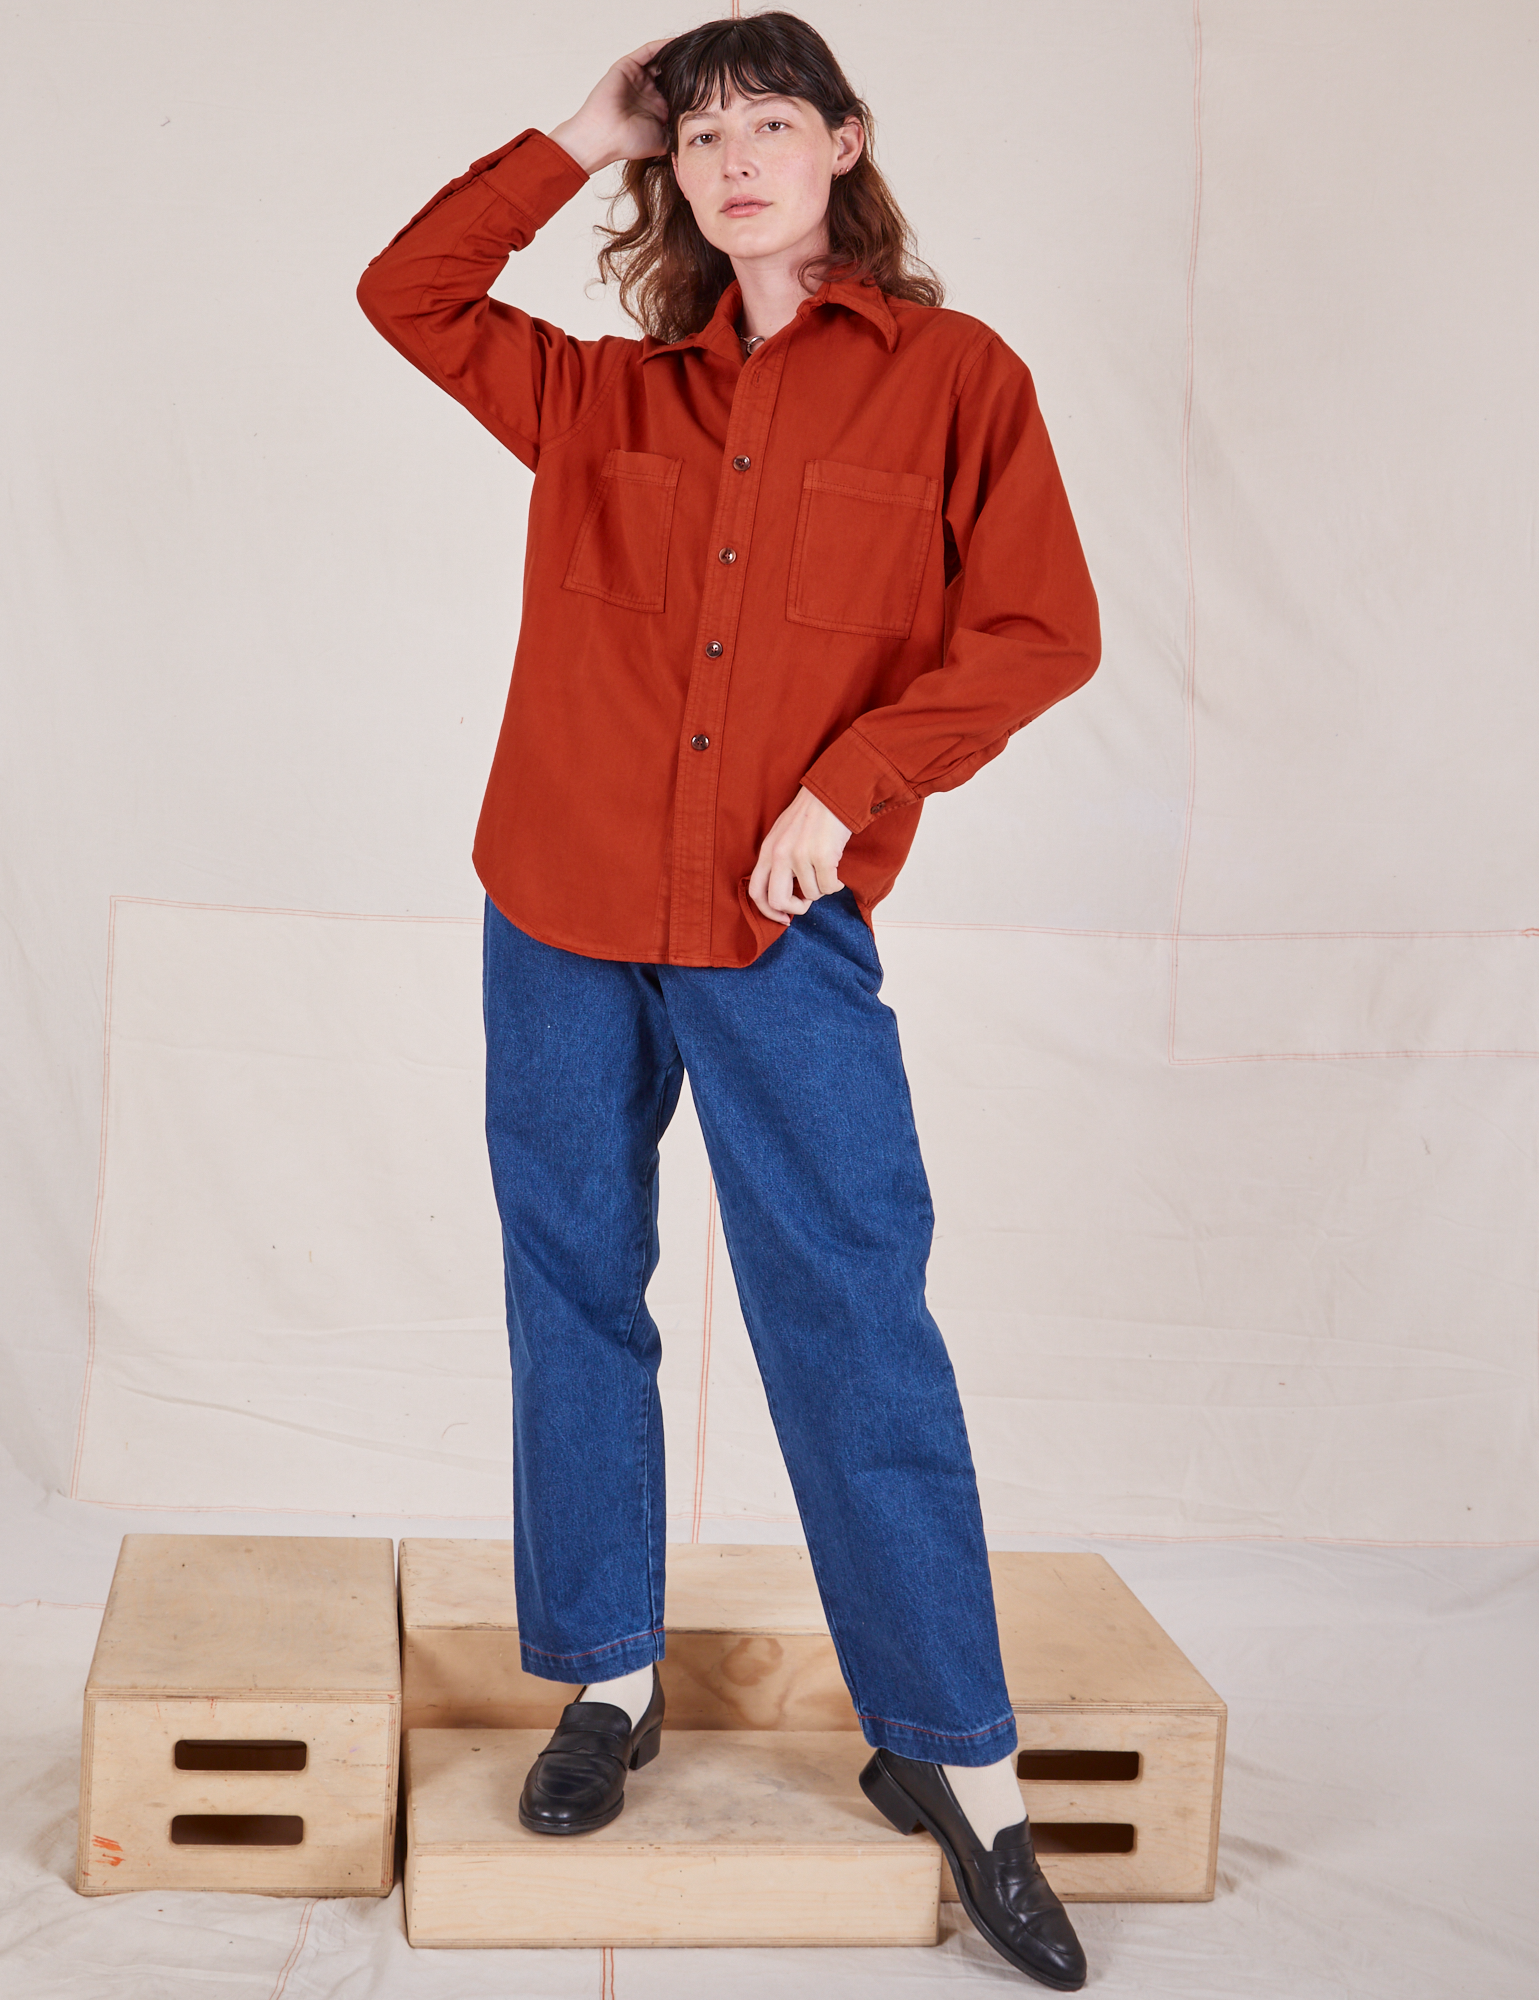 Alex is wearing a buttoned up Oversize Overshirt in Paprika and dark wash Trouser Jeans